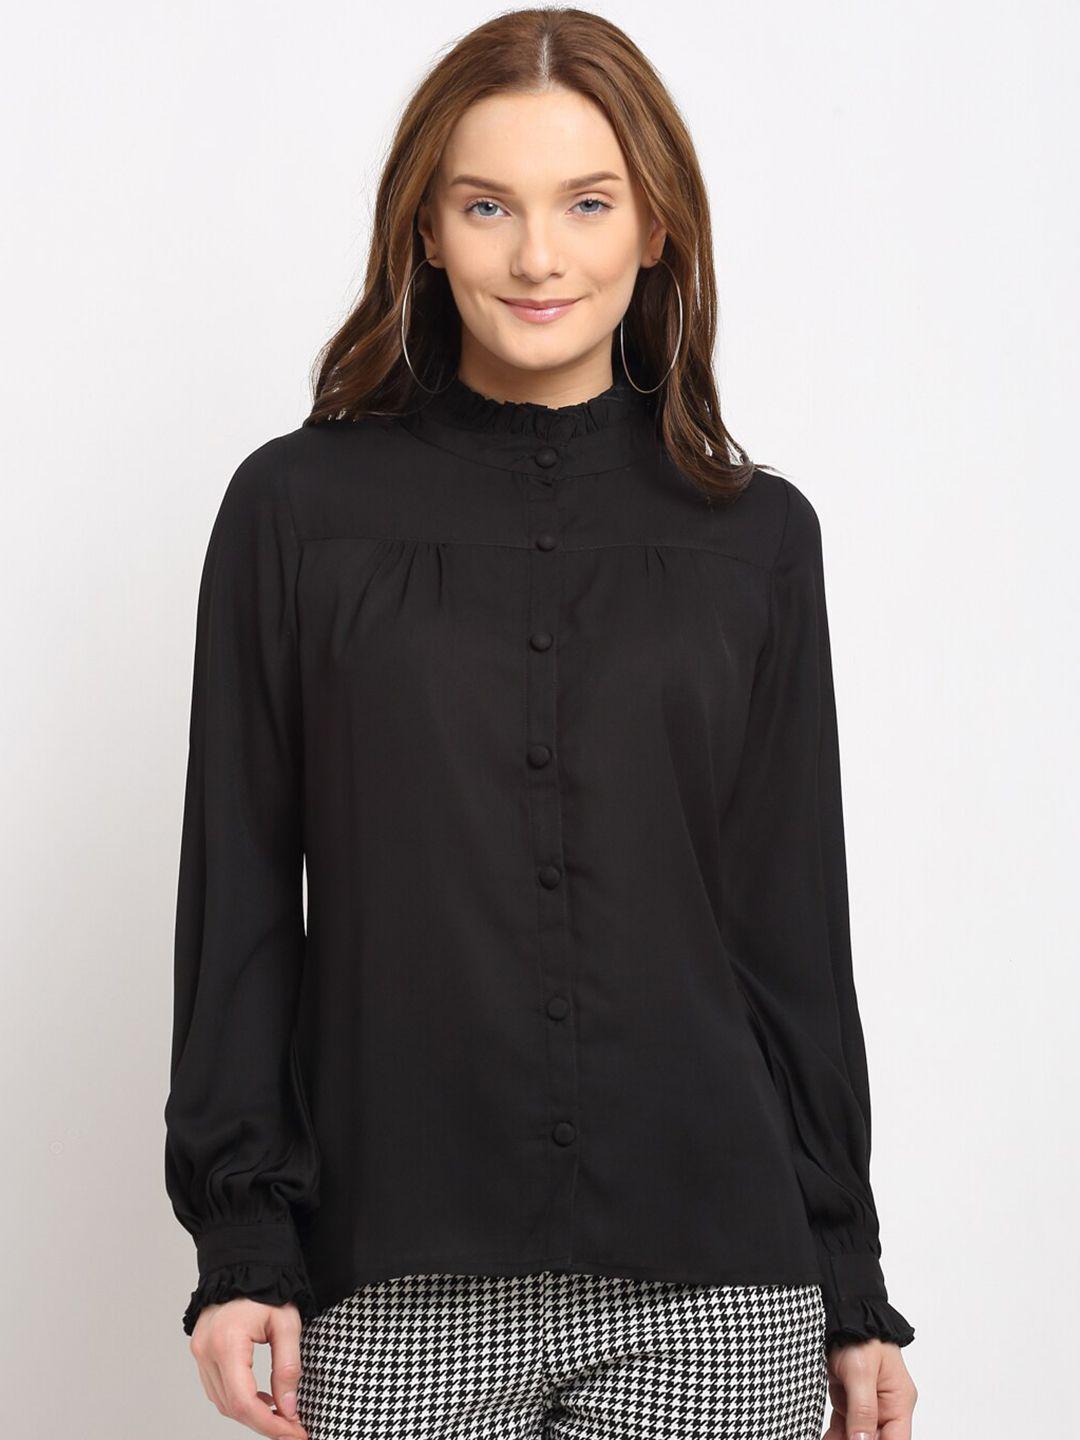 la zoire black mandarin collar shirt style top with frilled details